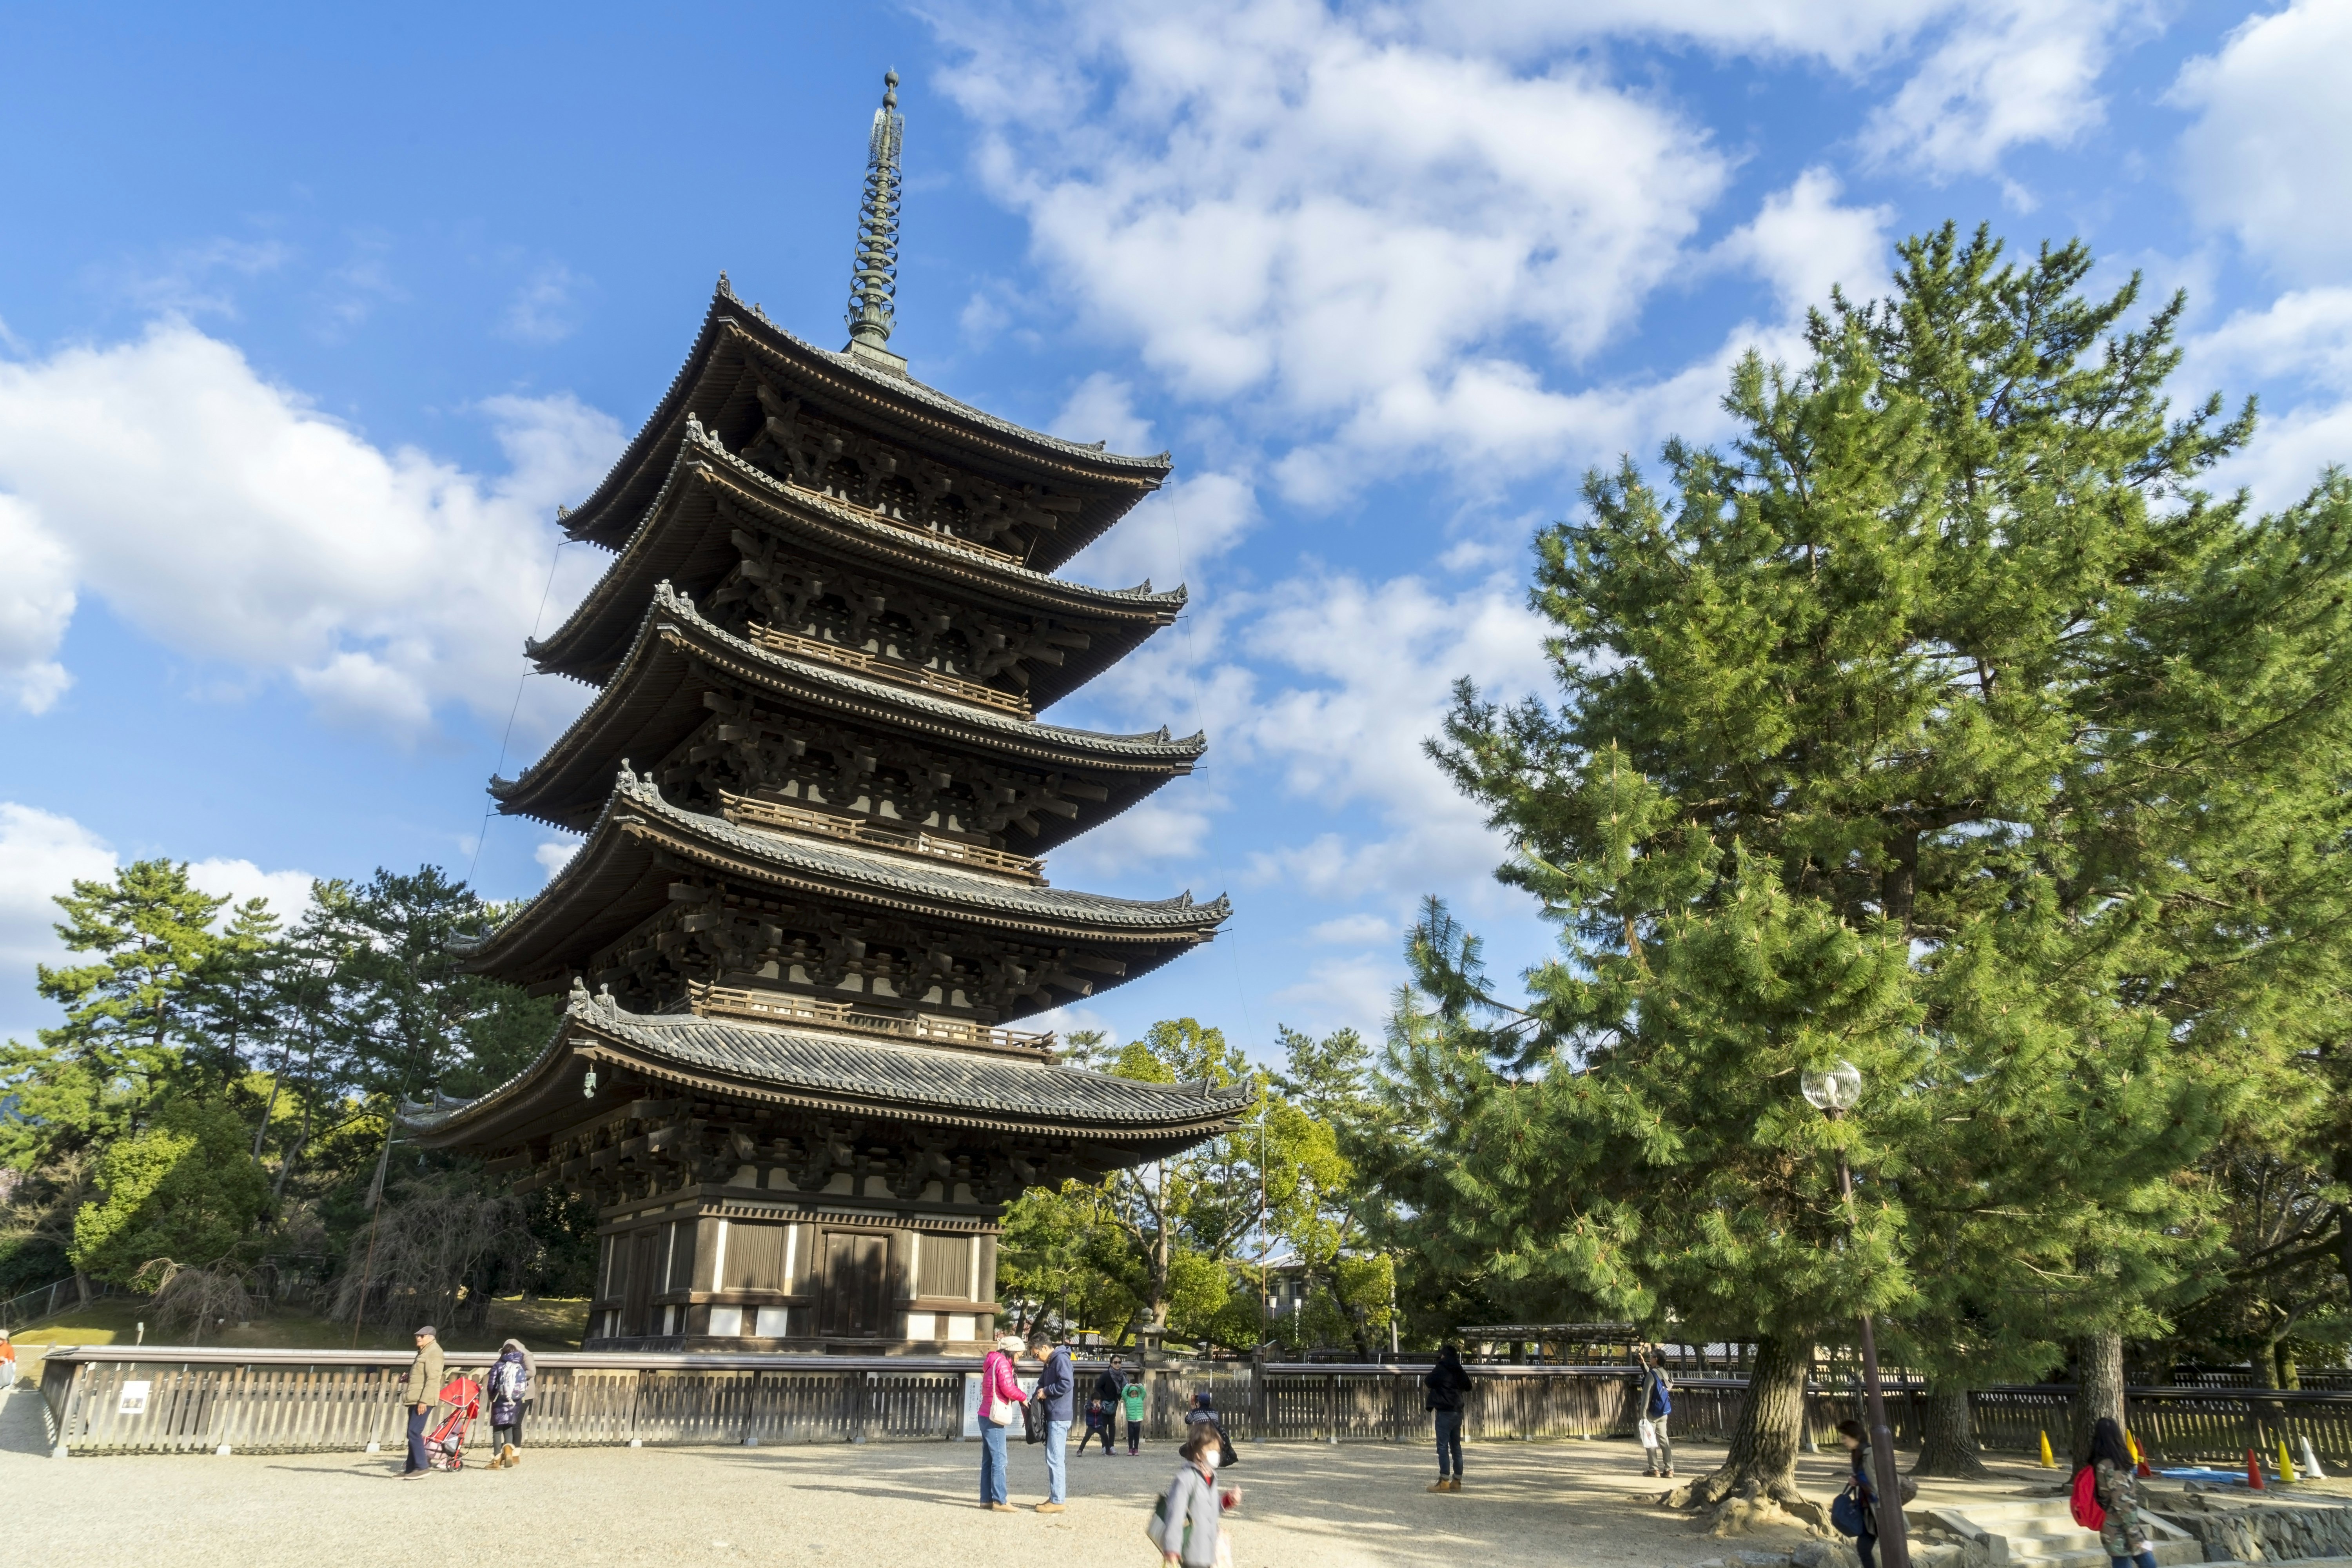 A five-storey pagoda at Kōfuku-ji temple in Nara stretches into the sky; there are people outside it and trees next to it. 